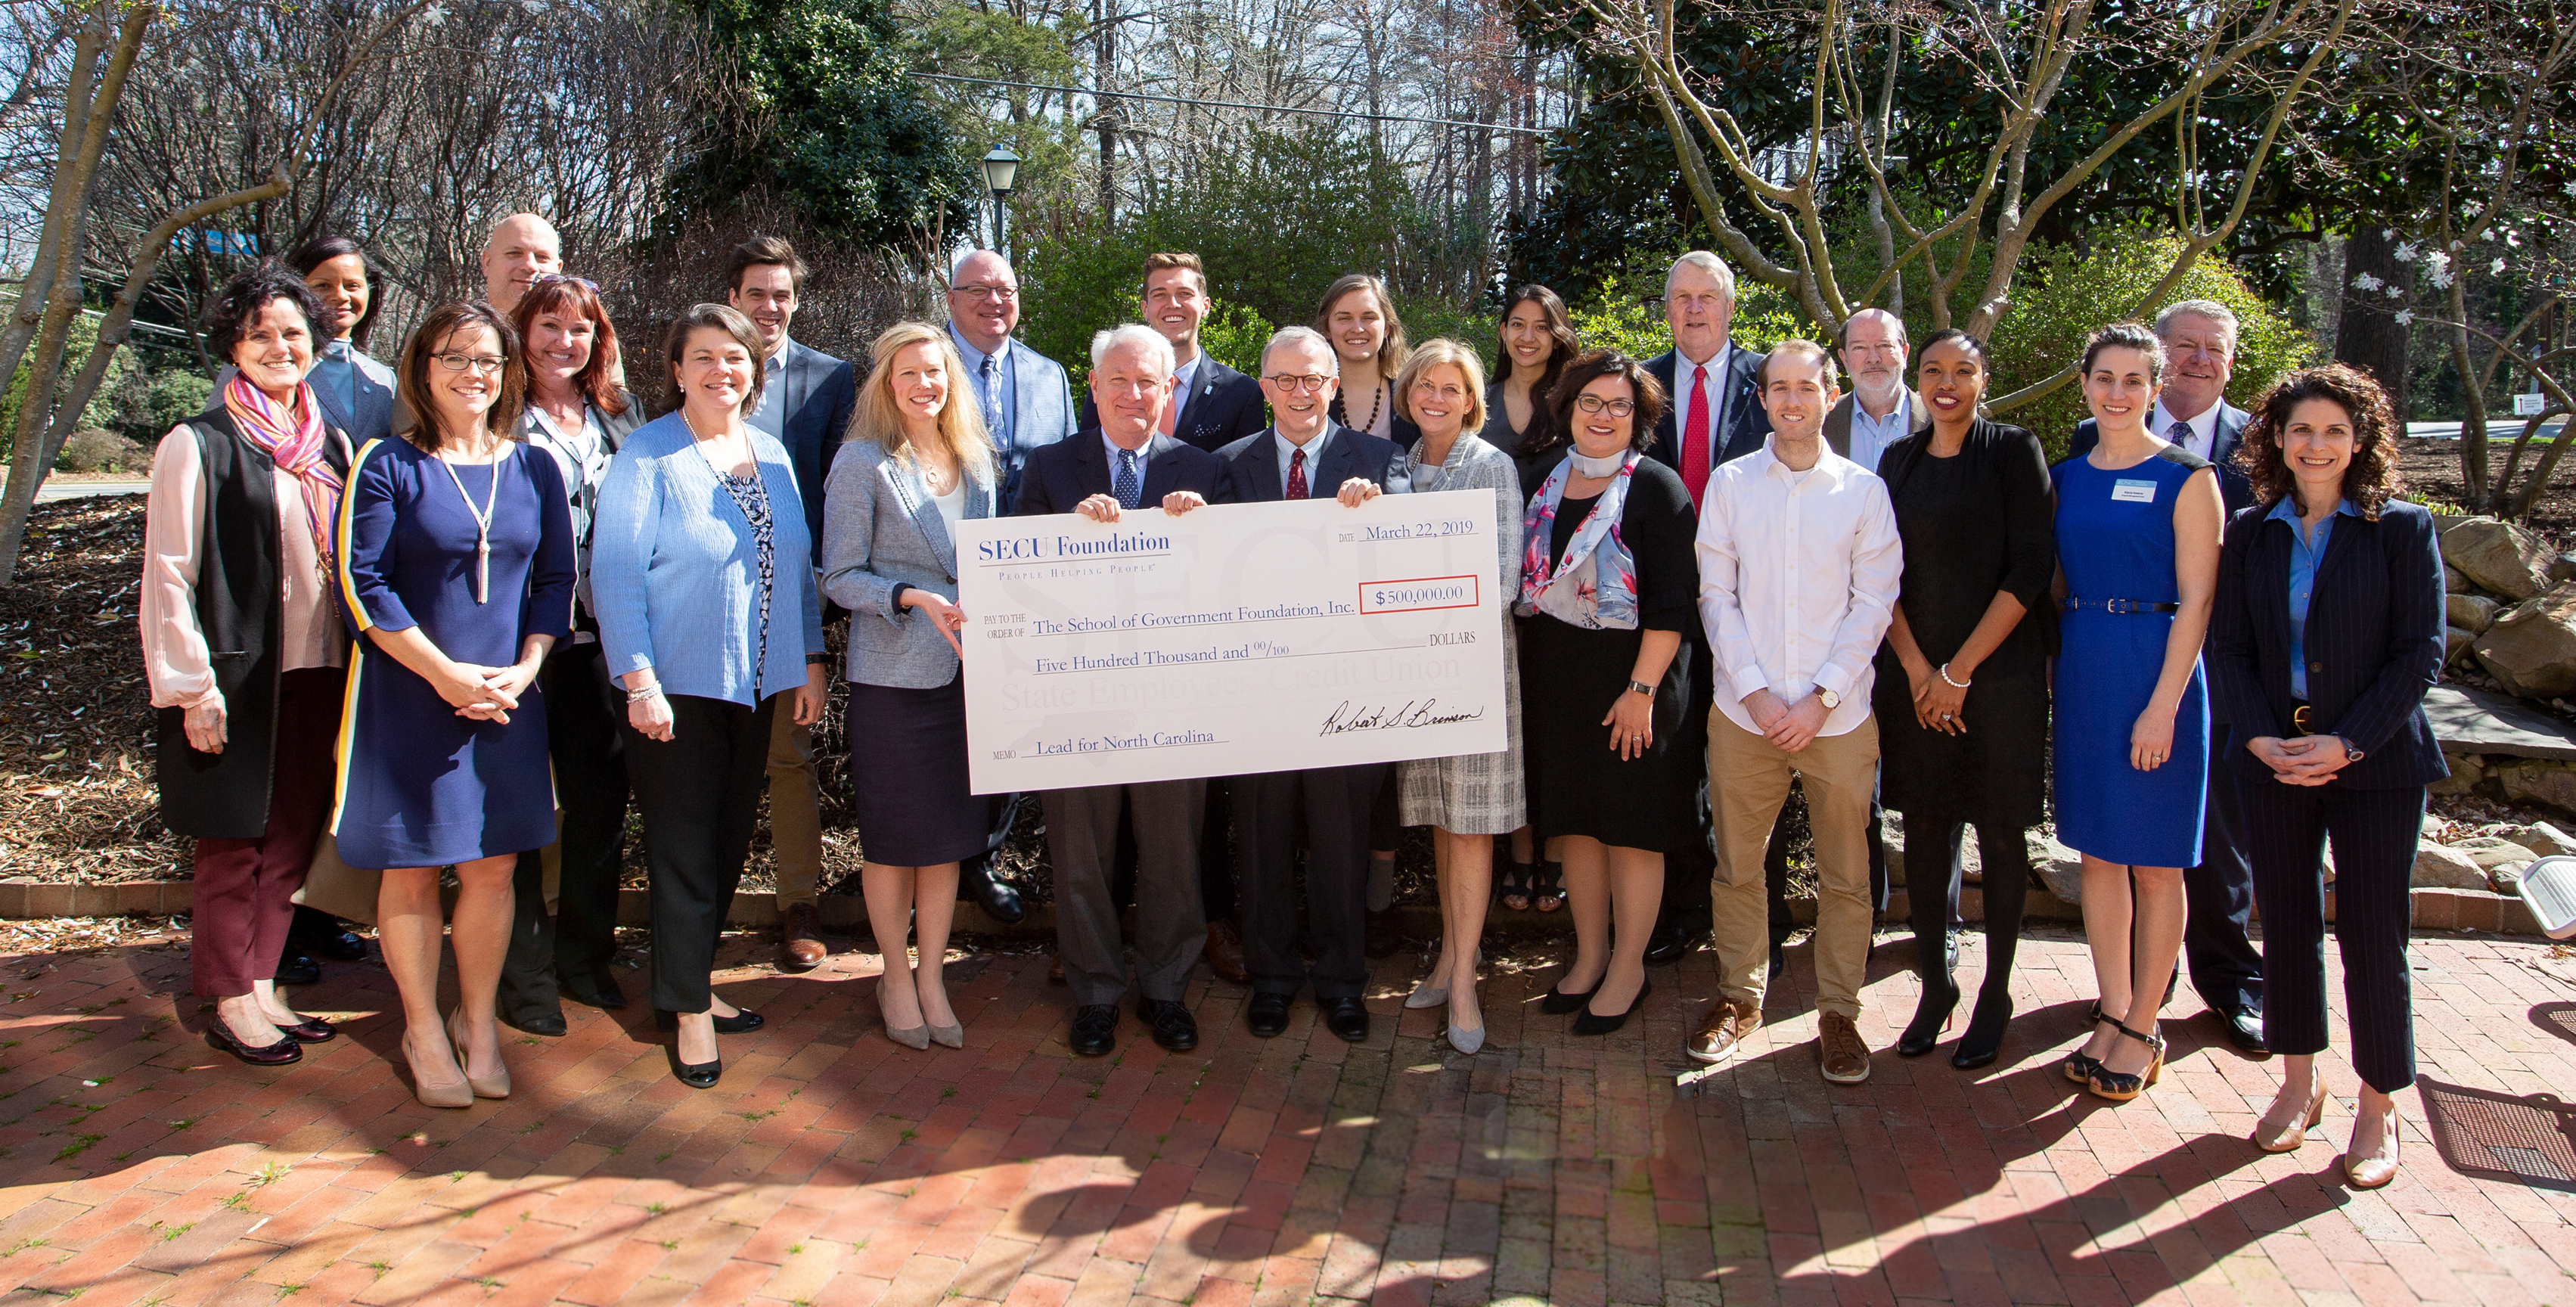 SECU Foundation invests in Lead for North Carolina 